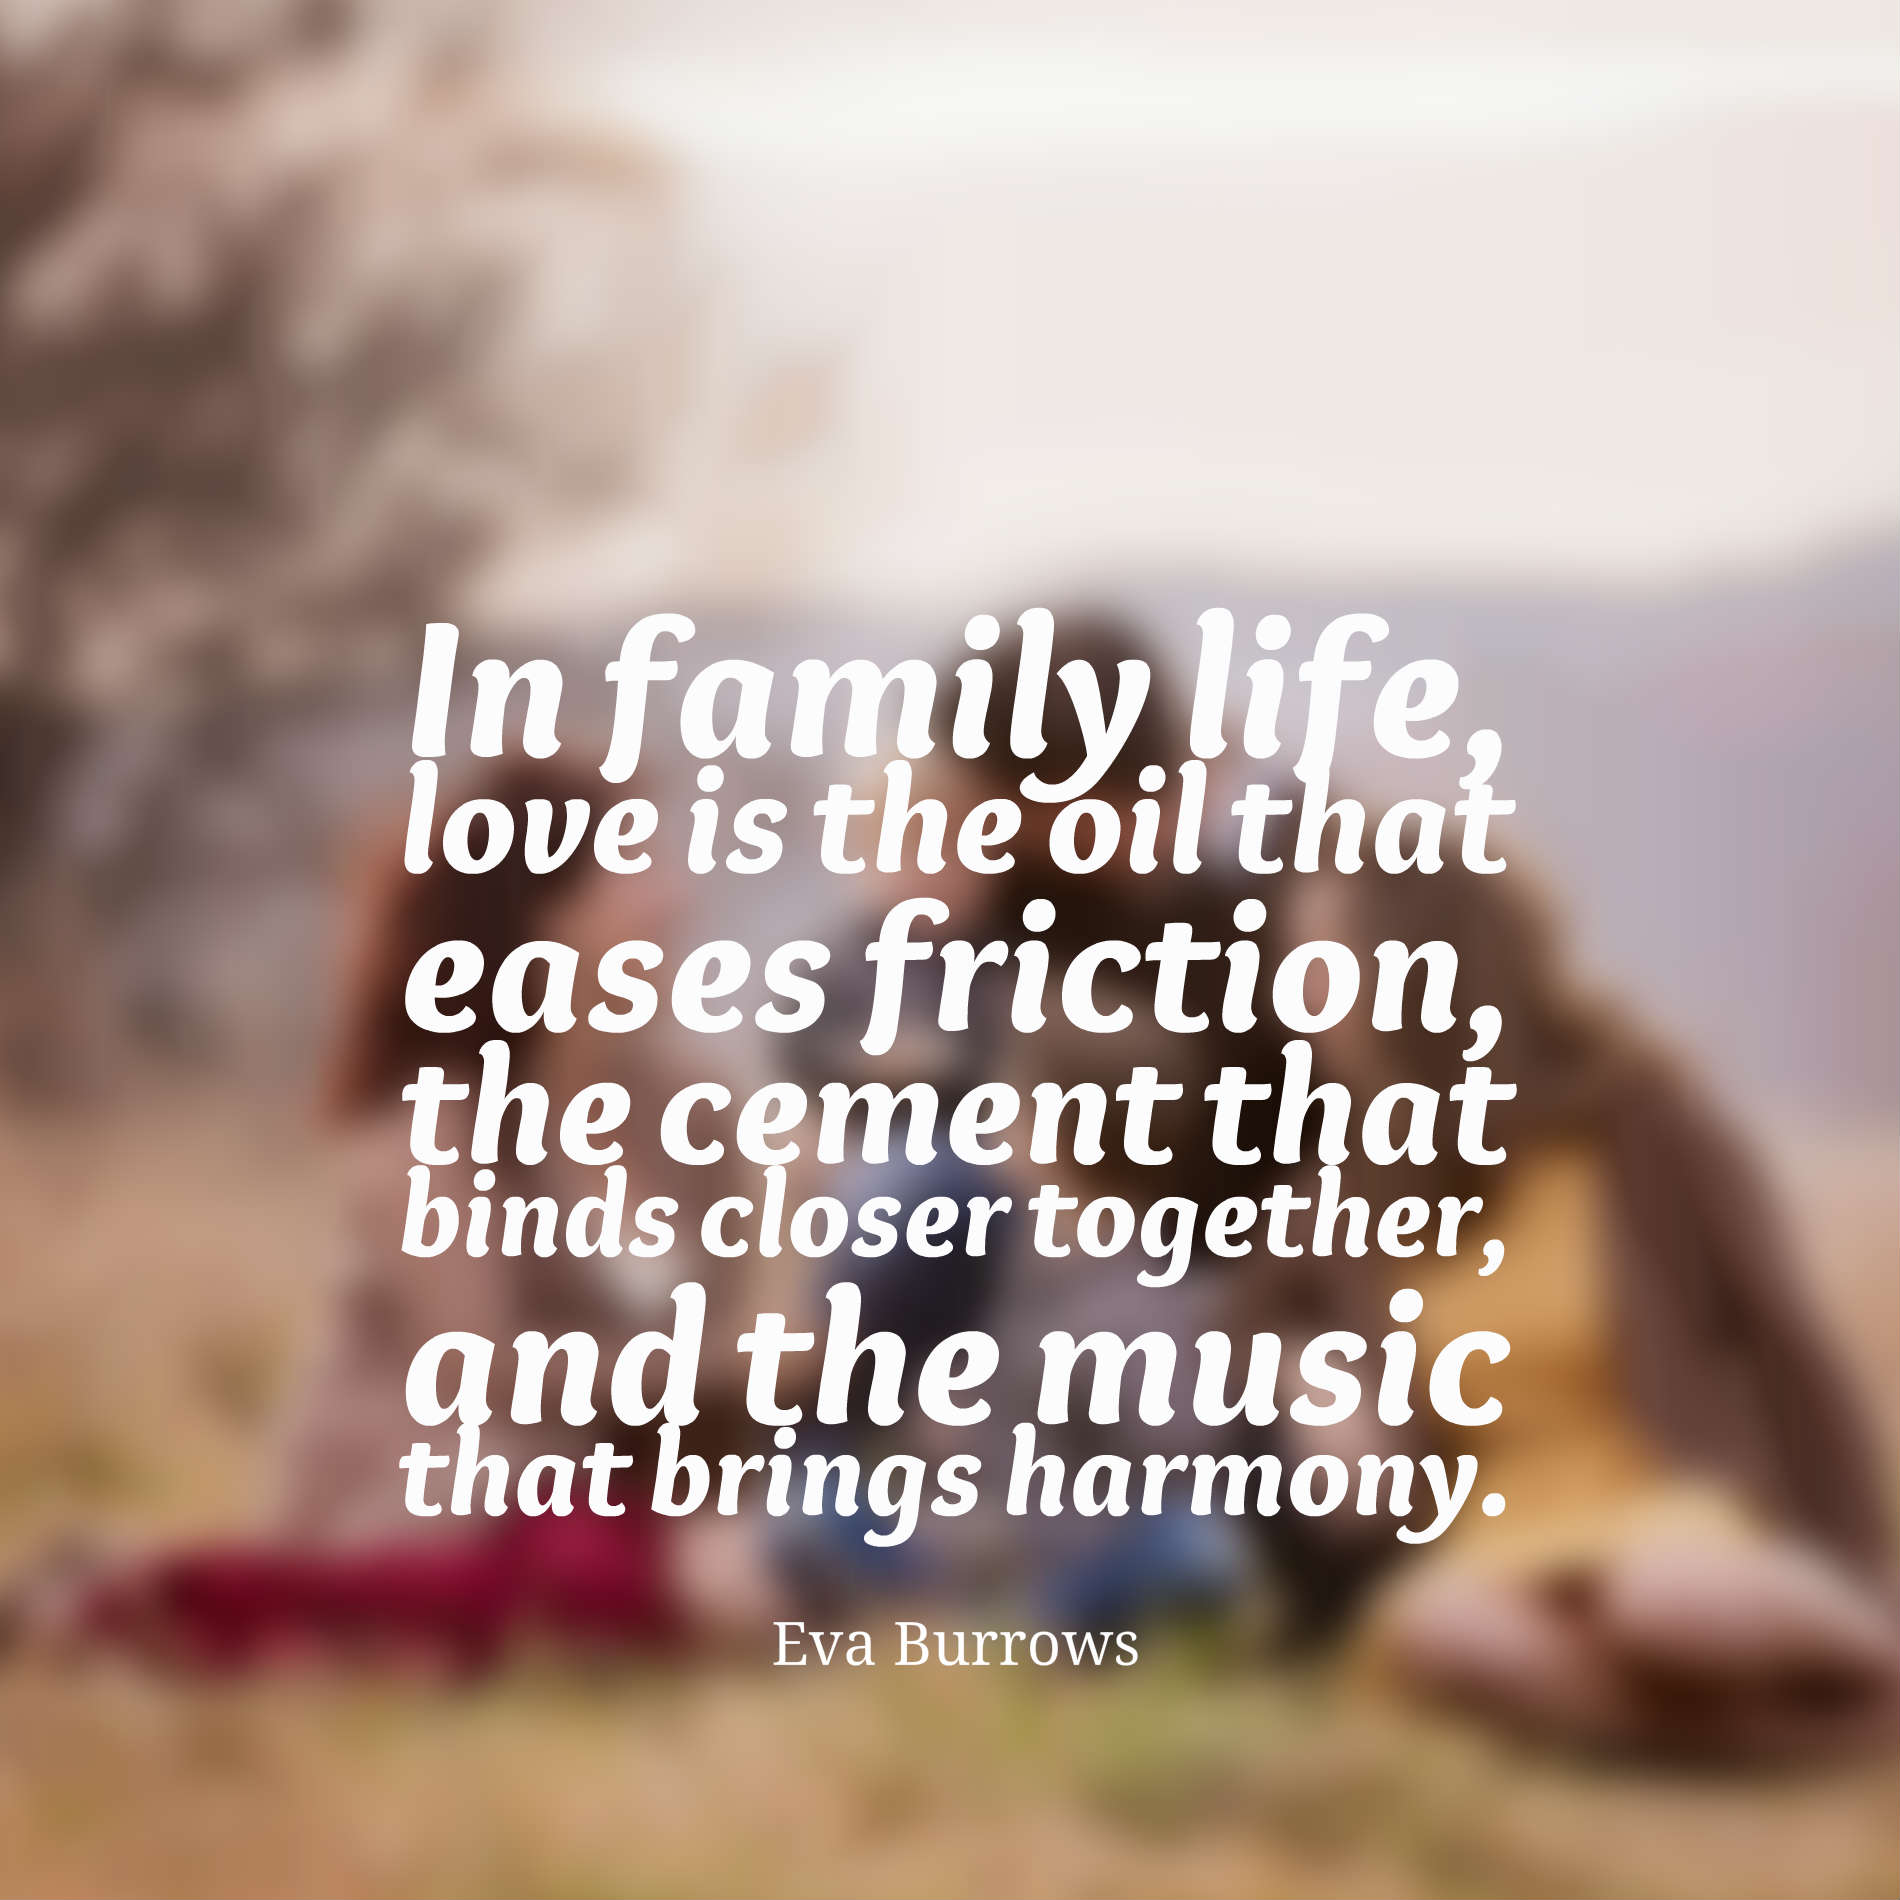 In family life, love is the oil that eases friction, the cement that binds closer together, and the music that brings harmony.